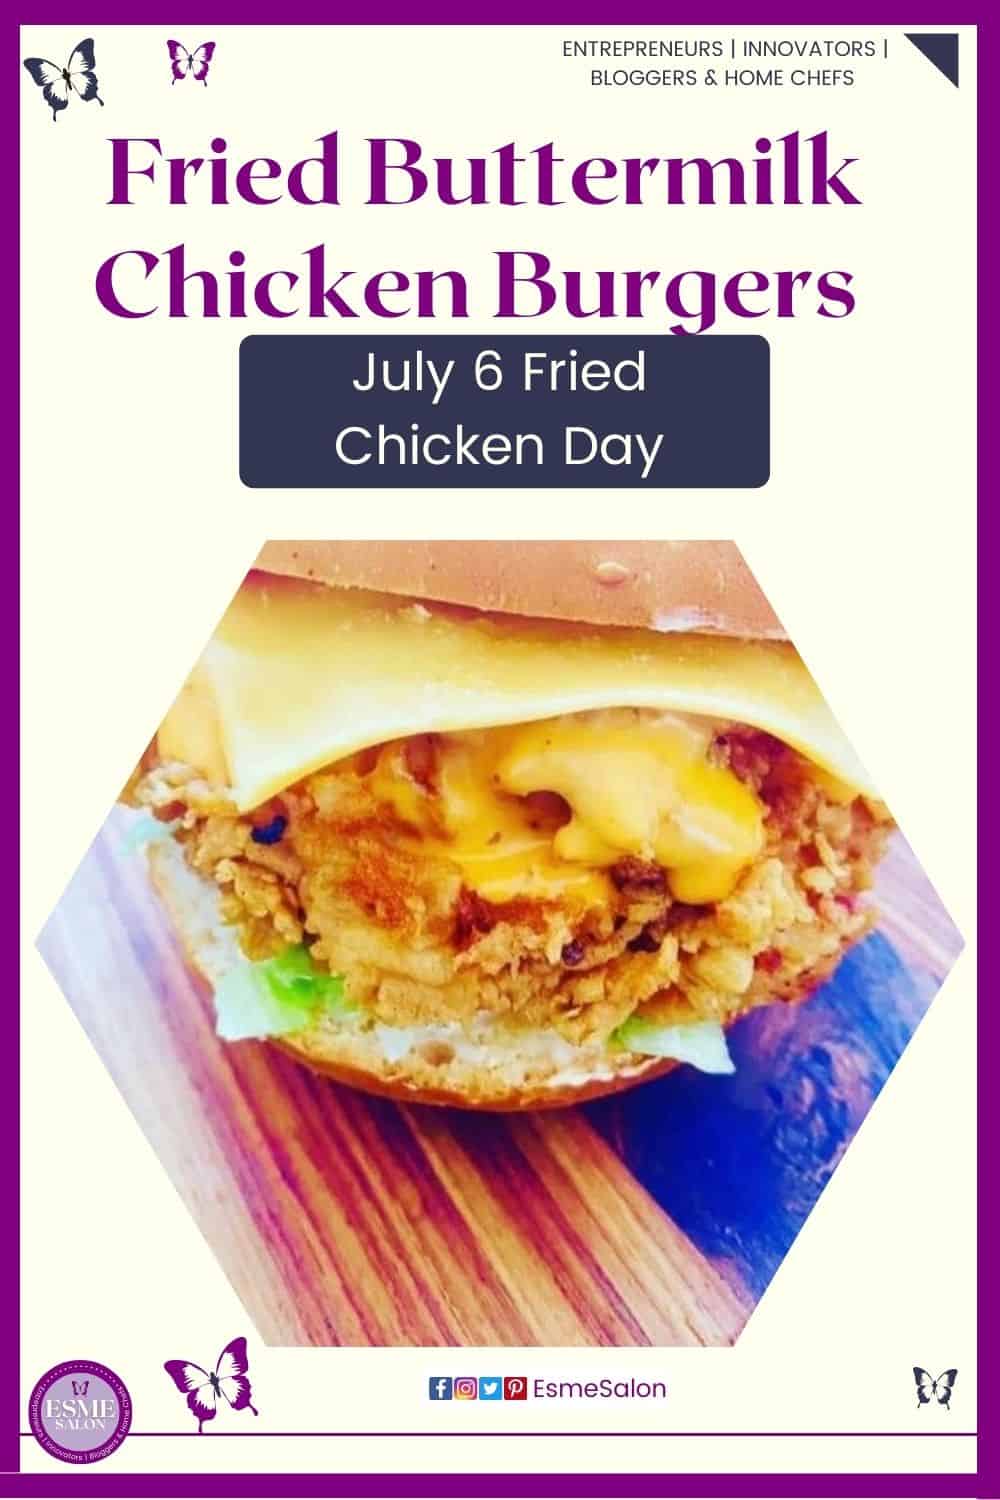 an image of a chicken burger with a fried chicken patty and cheese